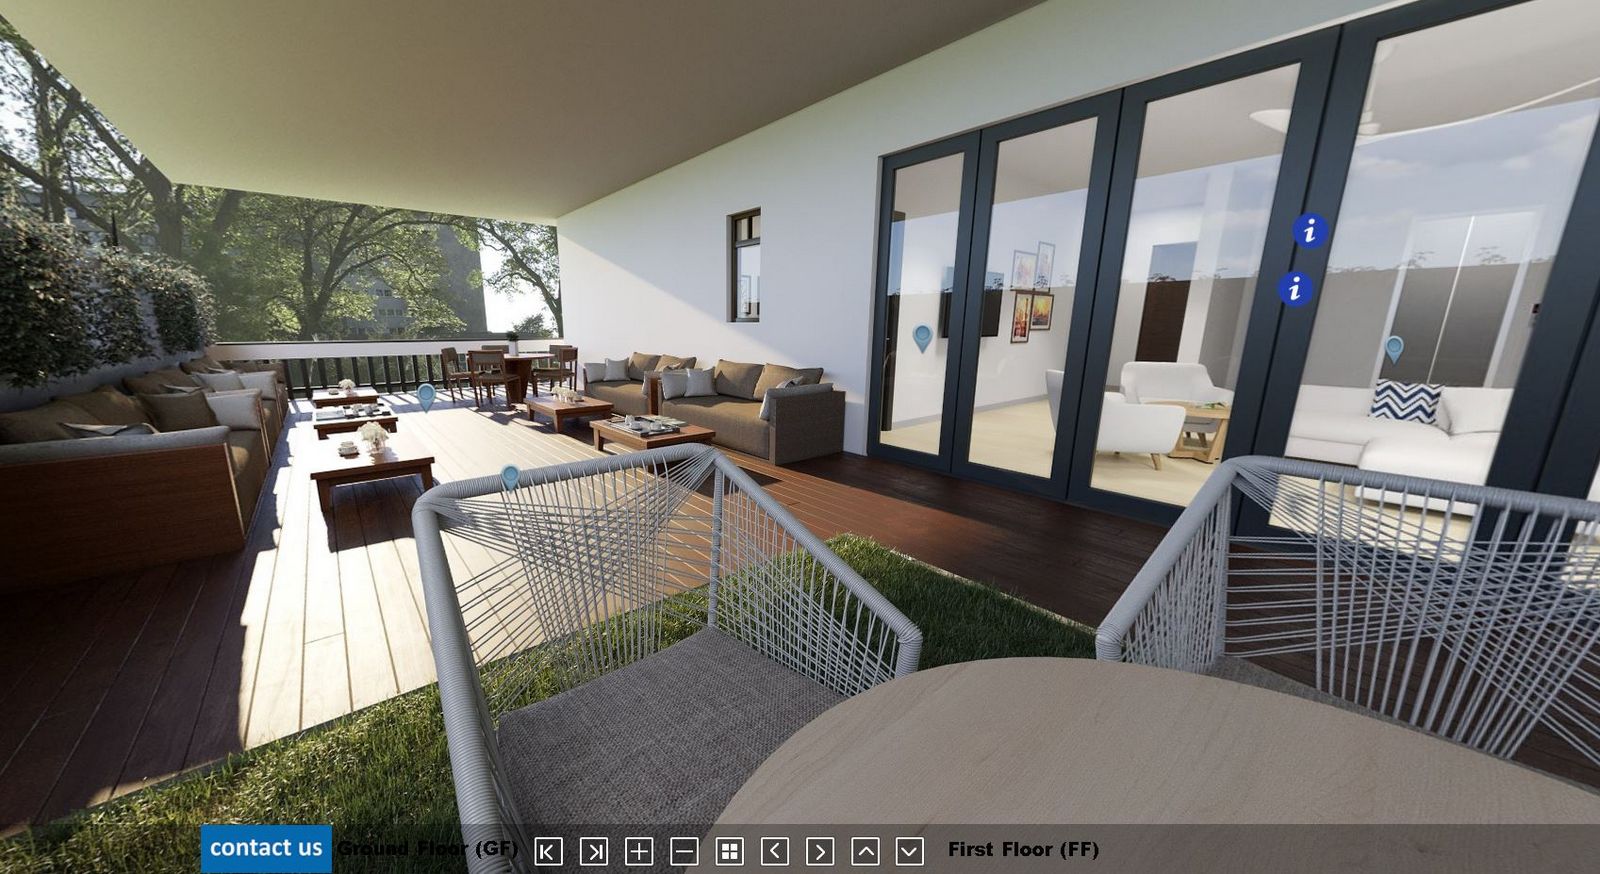 virtual reality, companies, architecture, rendering, studio, animation, visualization, services, design, view, Idea, application, services, designer, panoramic, 360, virtual tour